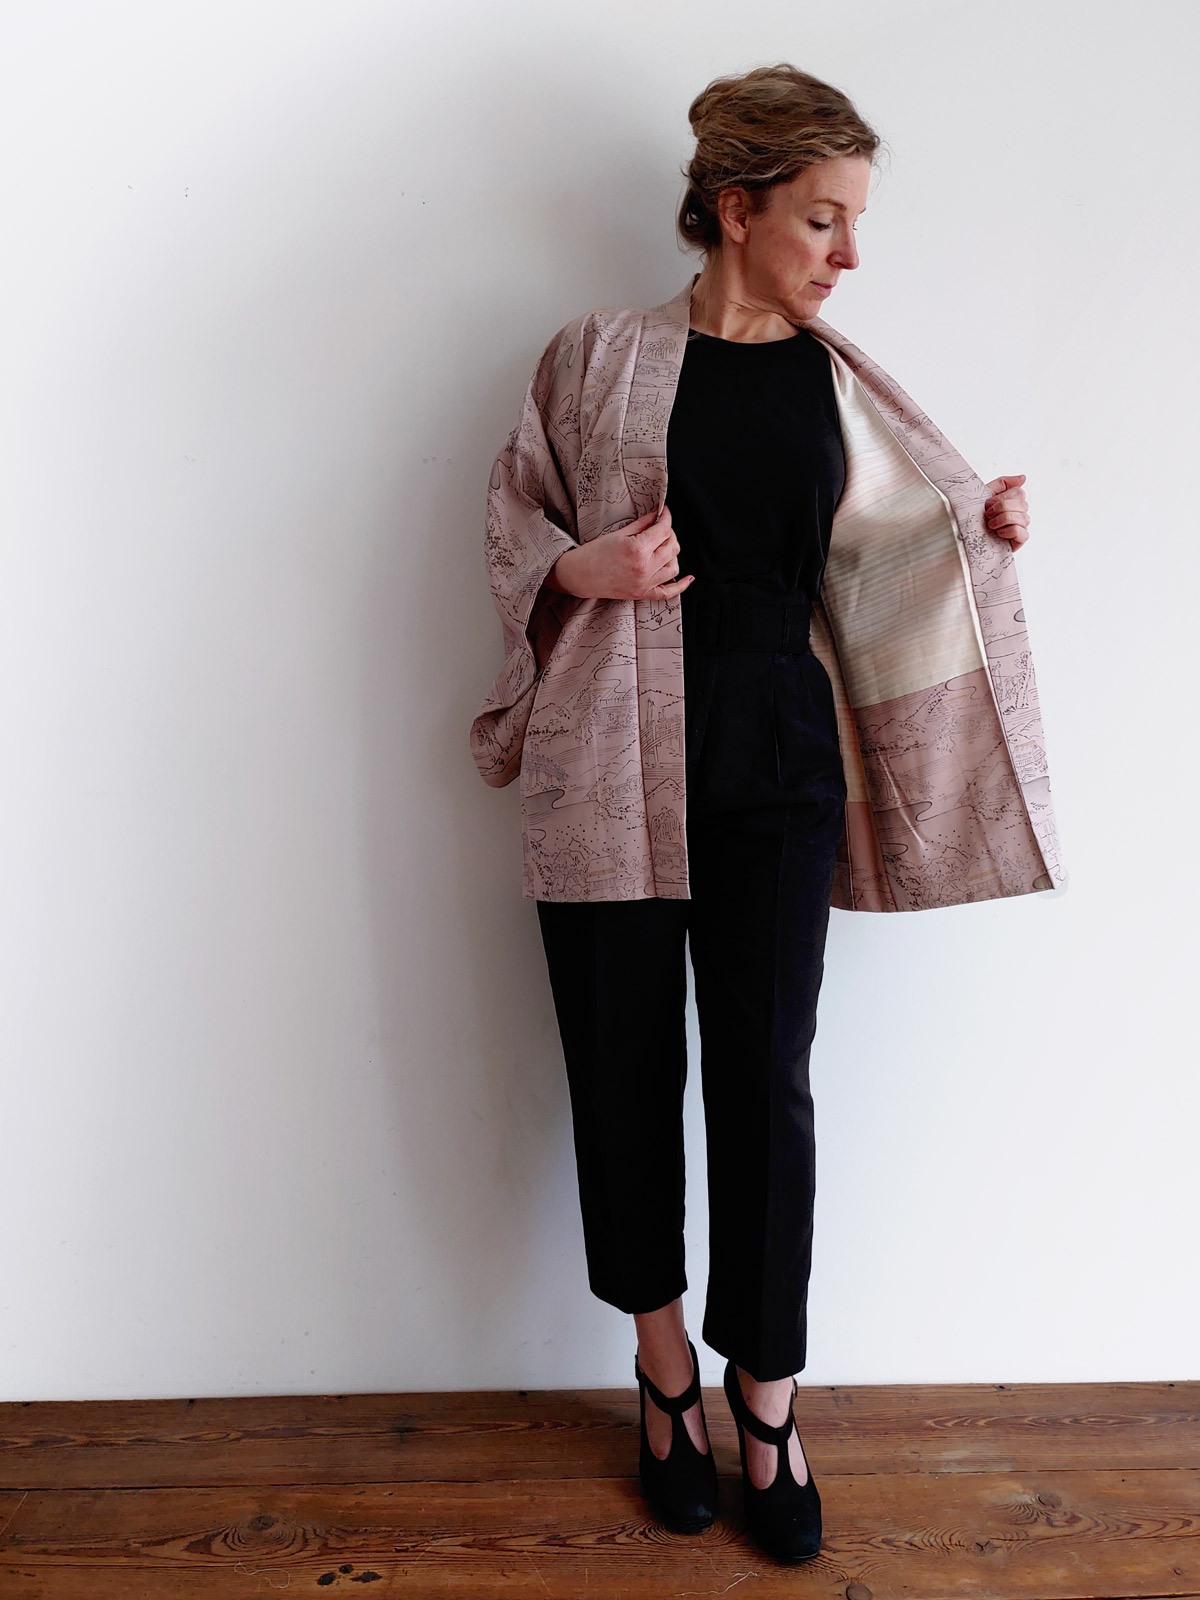 Yumi – Kimono jacket in dusty pink with pattern of traditional Japanese landscapes.